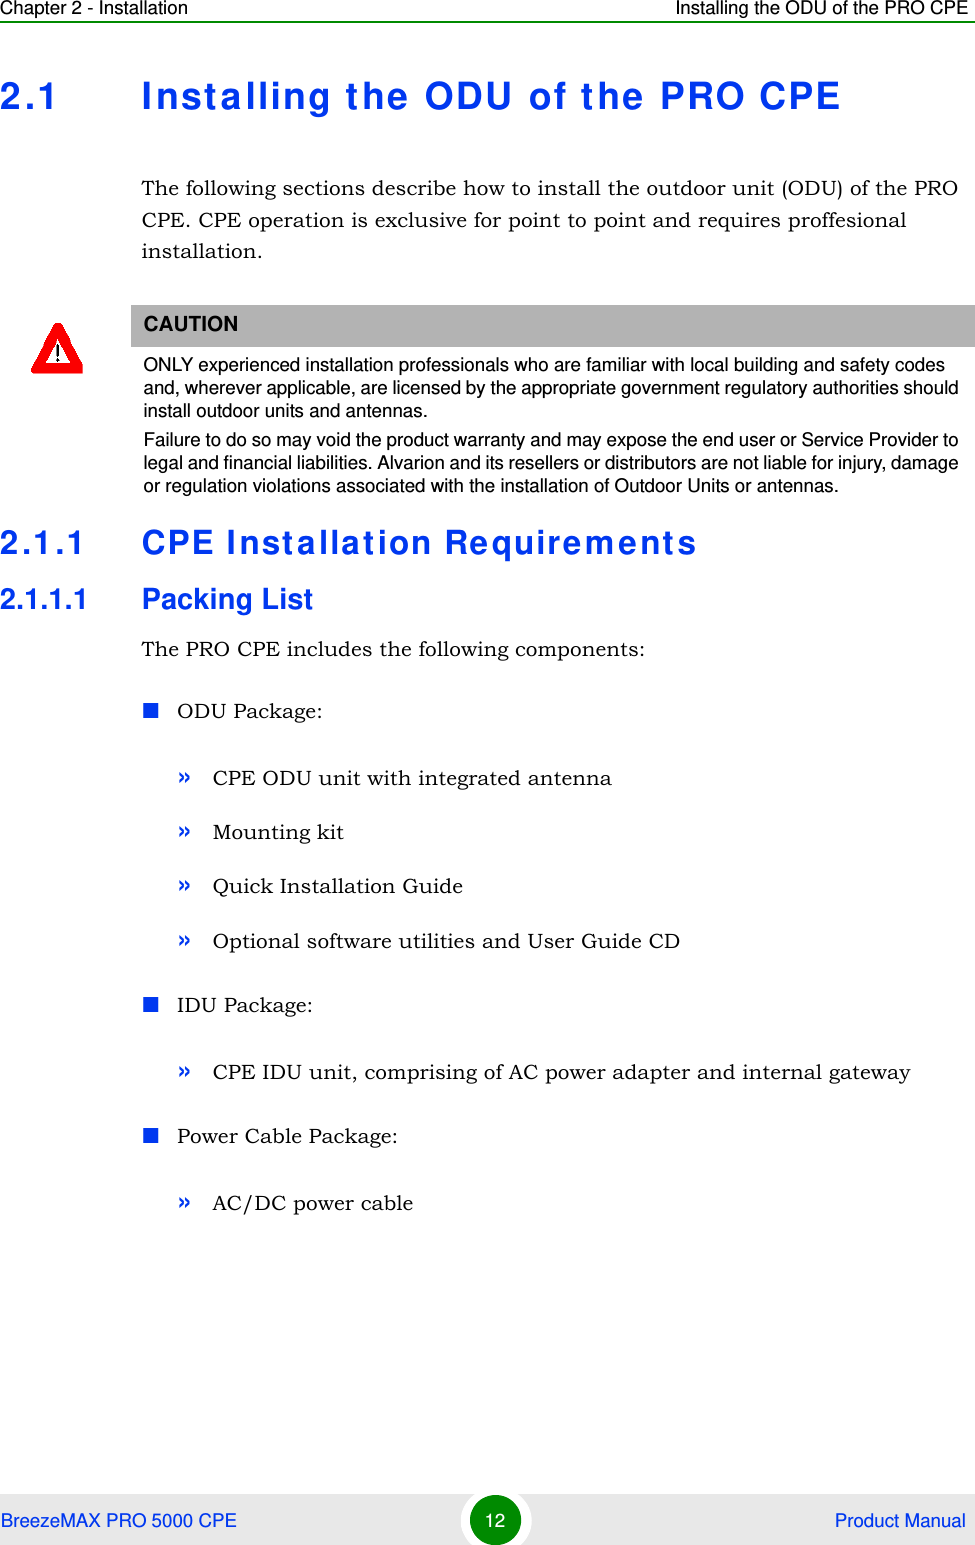 Chapter 2 - Installation Installing the ODU of the PRO CPEBreezeMAX PRO 5000 CPE 12  Product Manual2.1 Installing the ODU of the PRO CPEThe following sections describe how to install the outdoor unit (ODU) of the PRO CPE. CPE operation is exclusive for point to point and requires proffesional installation.2.1.1 CPE Installation Requirements2.1.1.1 Packing ListThe PRO CPE includes the following components:ODU Package:»CPE ODU unit with integrated antenna»Mounting kit»Quick Installation Guide»Optional software utilities and User Guide CDIDU Package:»CPE IDU unit, comprising of AC power adapter and internal gatewayPower Cable Package:»AC/DC power cableCAUTIONONLY experienced installation professionals who are familiar with local building and safety codes and, wherever applicable, are licensed by the appropriate government regulatory authorities should install outdoor units and antennas.Failure to do so may void the product warranty and may expose the end user or Service Provider to legal and financial liabilities. Alvarion and its resellers or distributors are not liable for injury, damage or regulation violations associated with the installation of Outdoor Units or antennas.